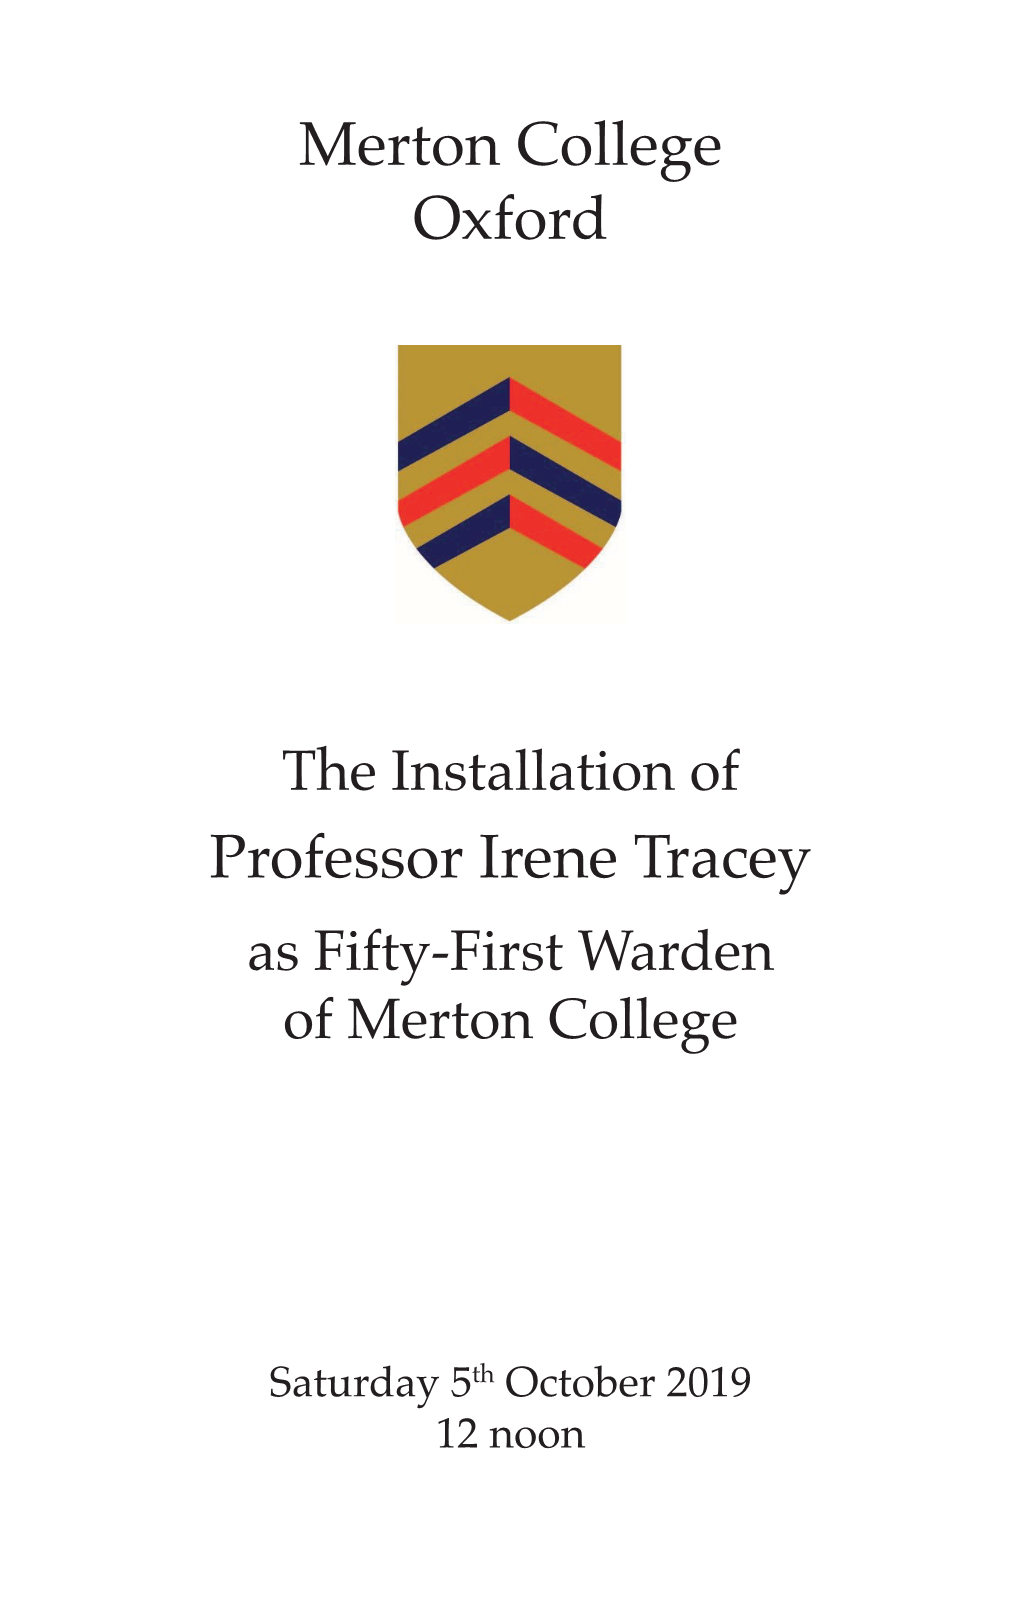 The Installation of Professor Irene Tracey As Fifty-First Warden of Merton College